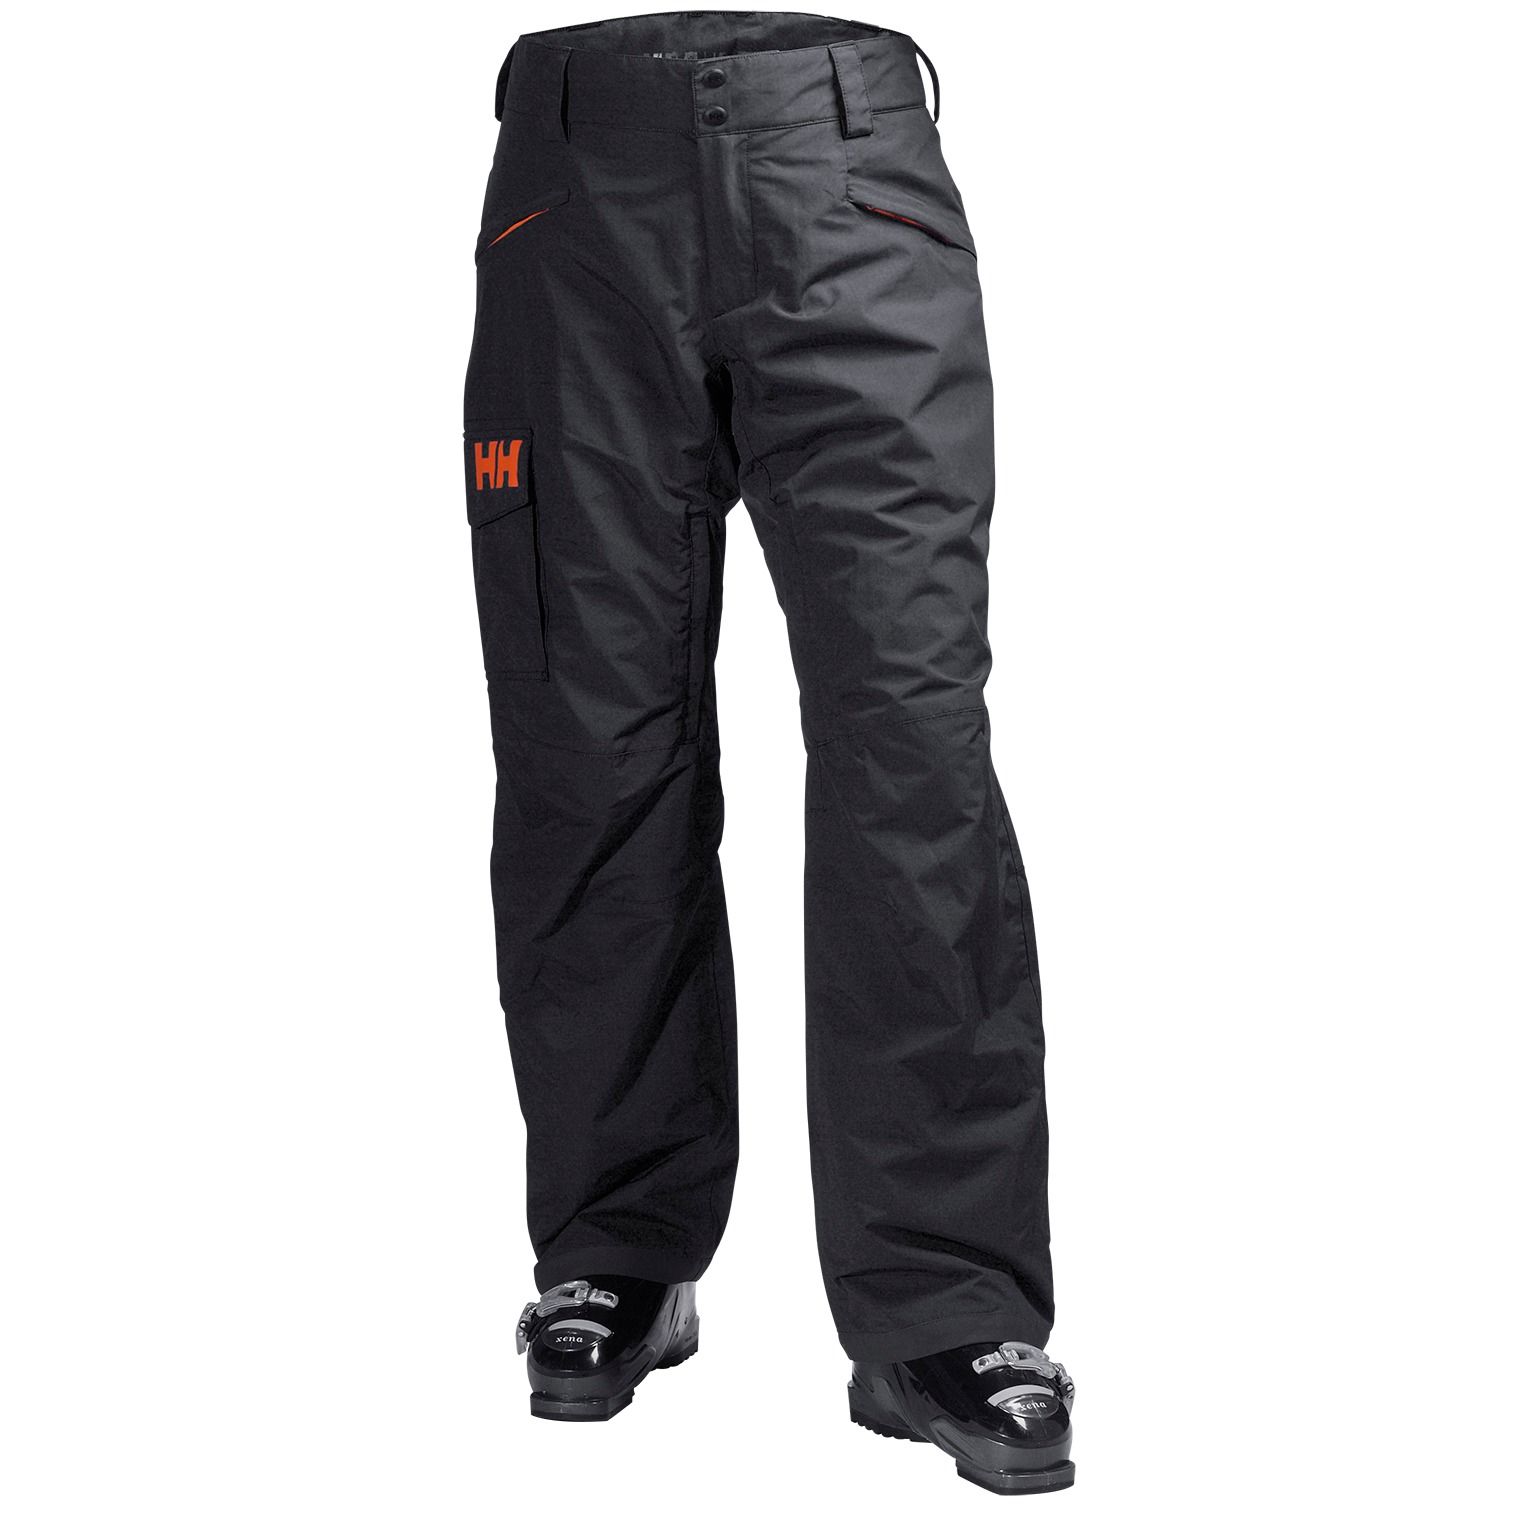 sogn cargo pant